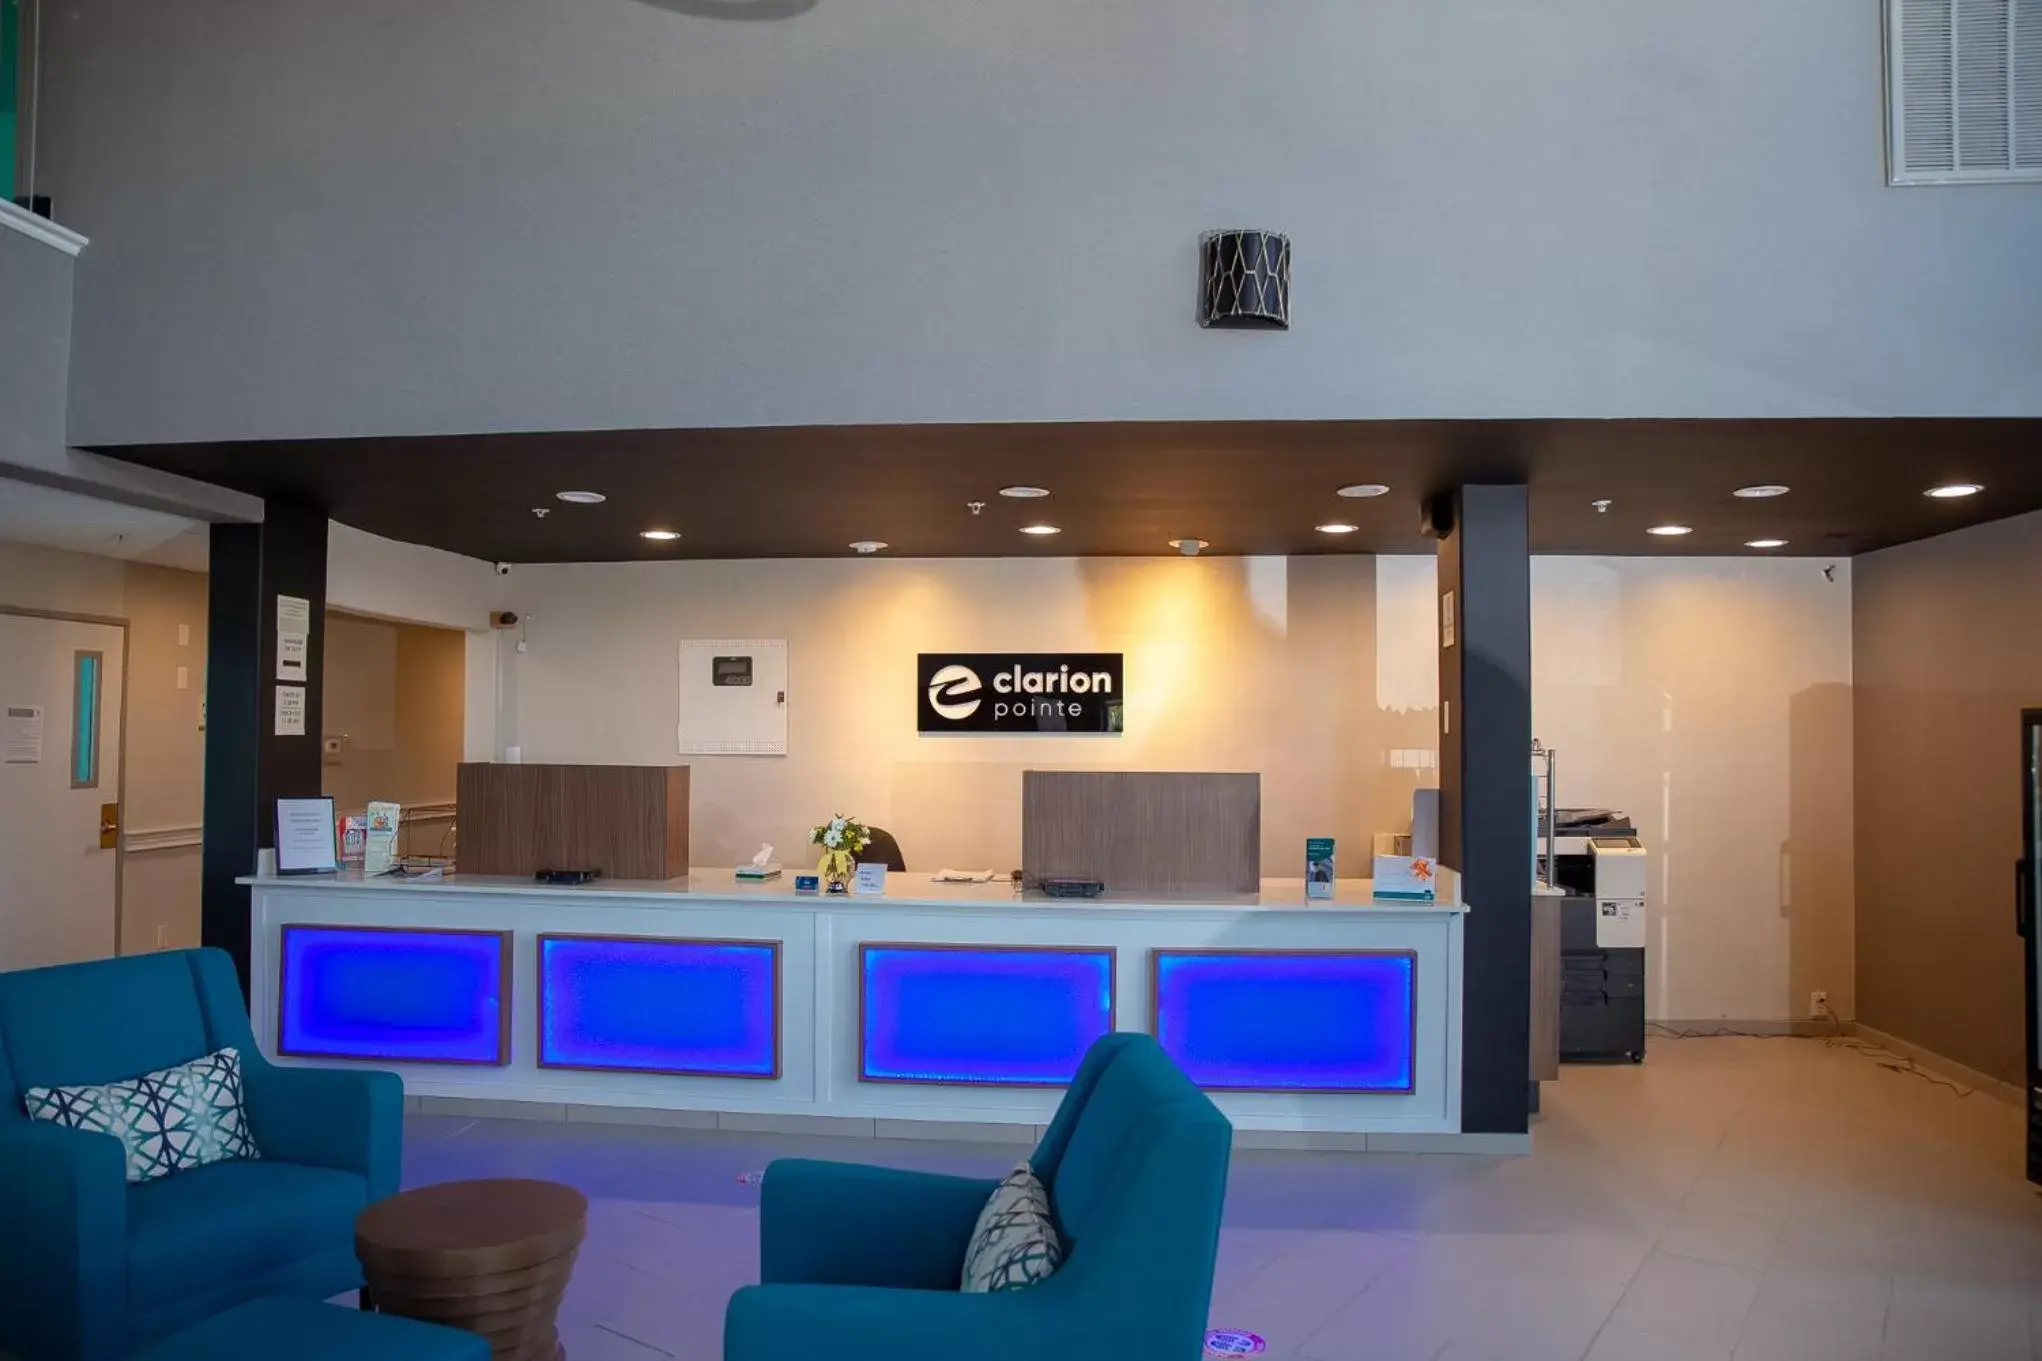 Lobby or reception in Clarion Pointe Indianapolis Airport